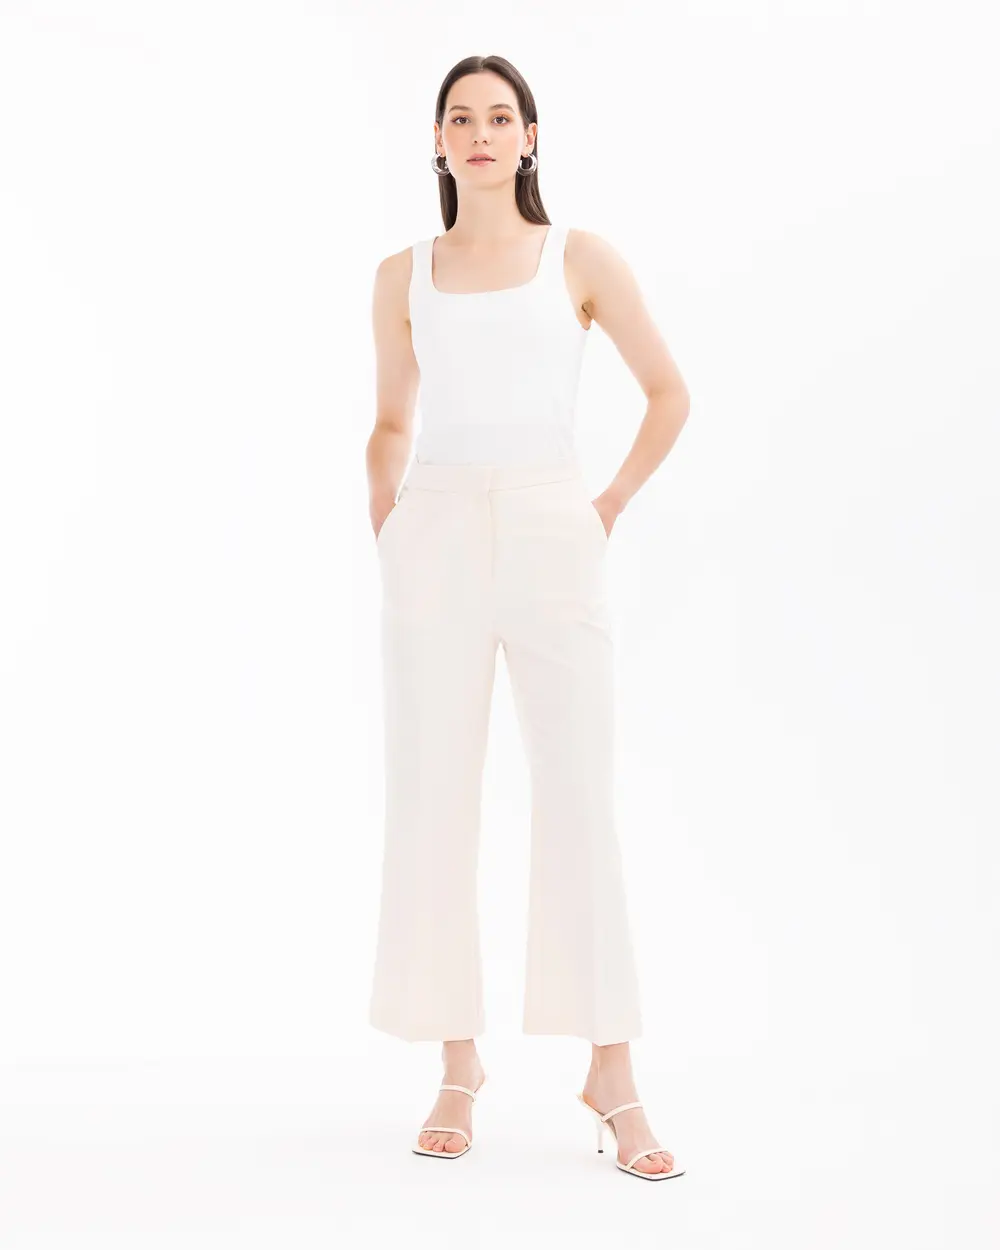 Ankle Length Pants with Pocket Detail